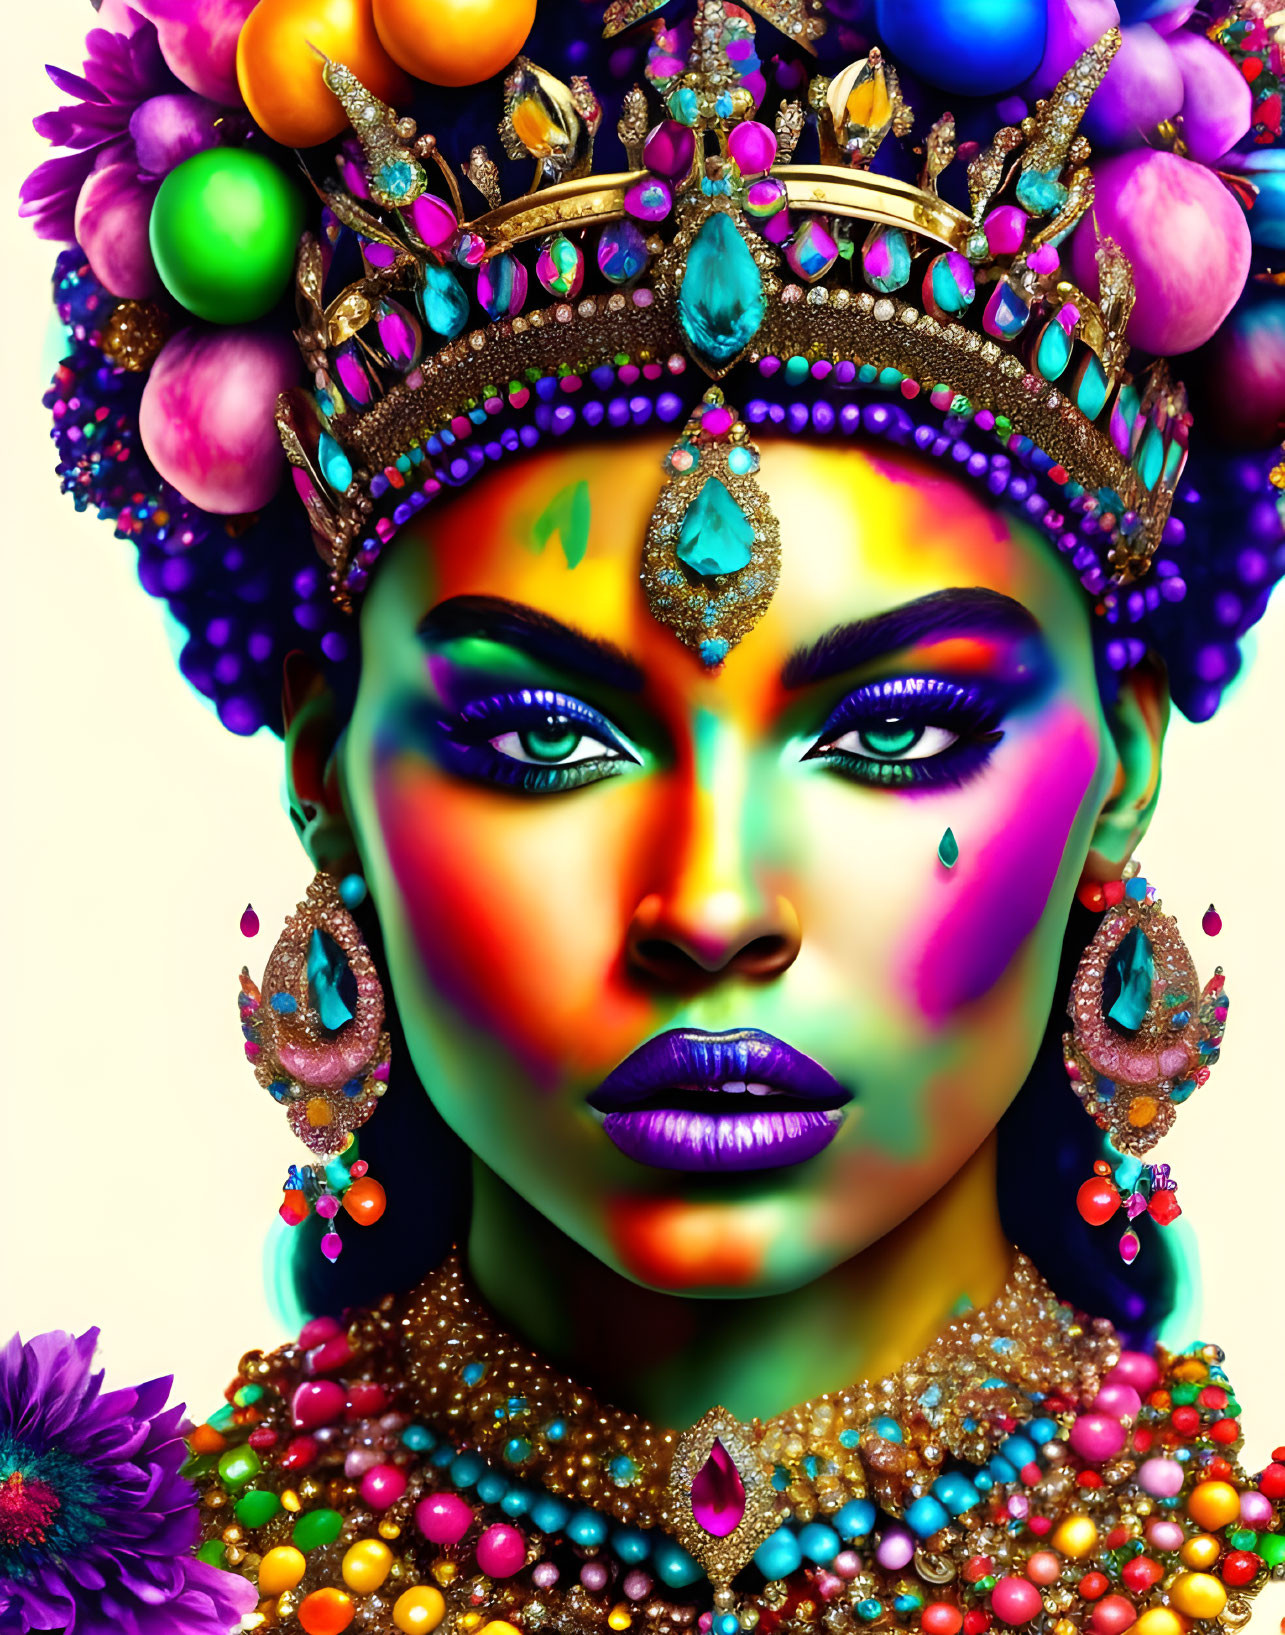 Colorful portrait of woman with jewel-encrusted crown and bold makeup